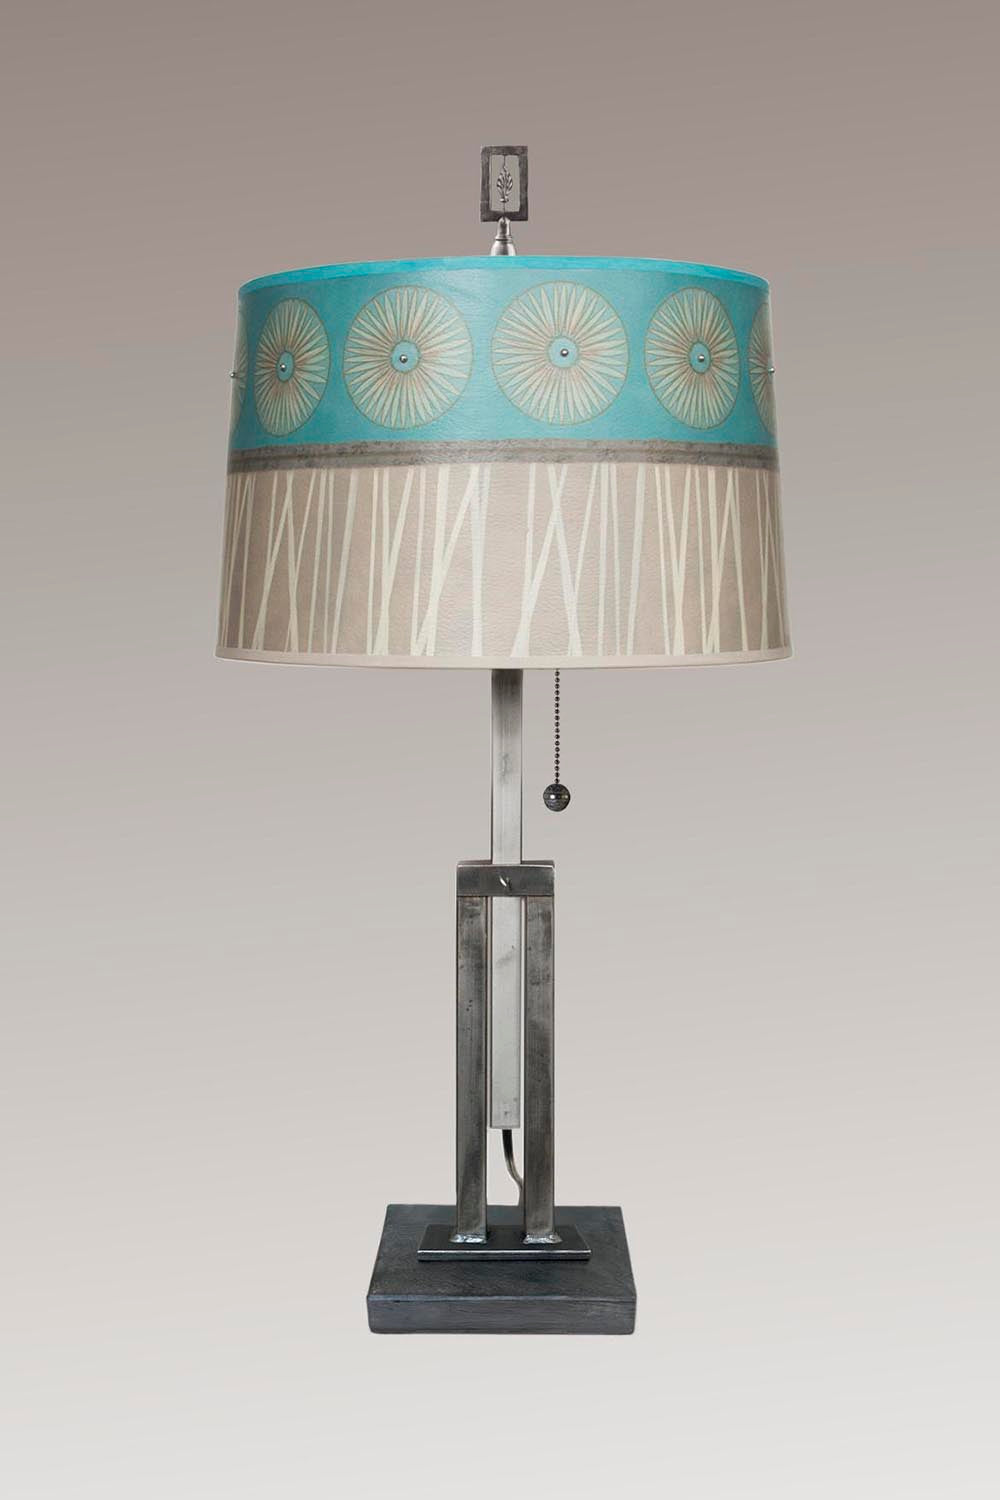 Janna Ugone &amp; Co Table Lamps Adjustable-Height Steel Table Lamp with Large Drum Shade in Pool